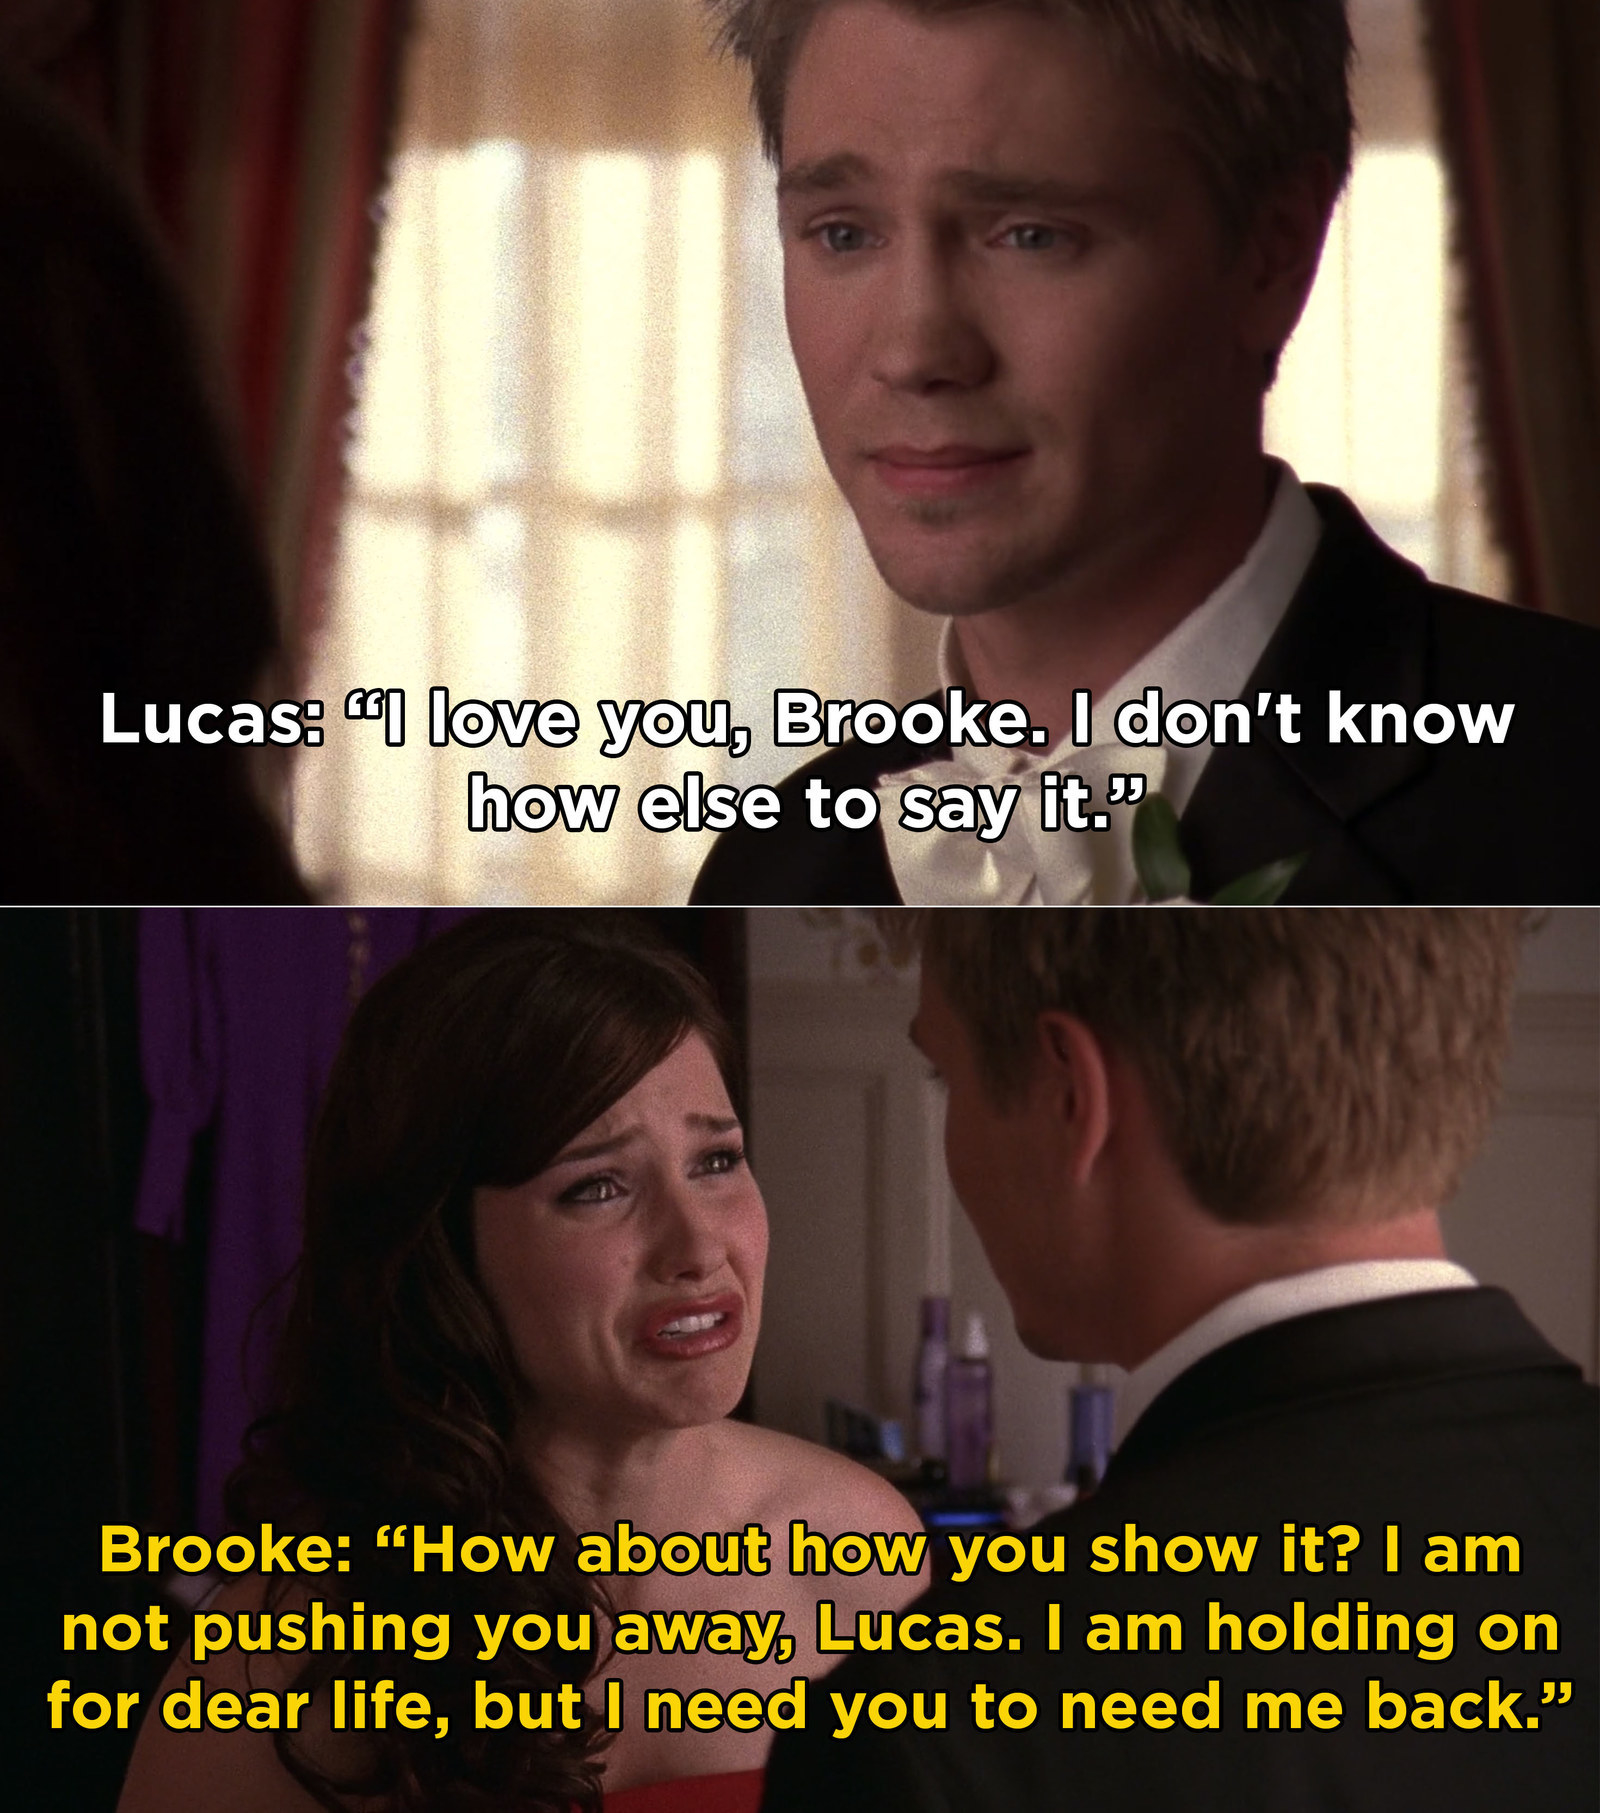 Brooke: &quot;I&#x27;m not pushing you away, I&#x27;m holding on for dear life but I need you to need me back&quot;